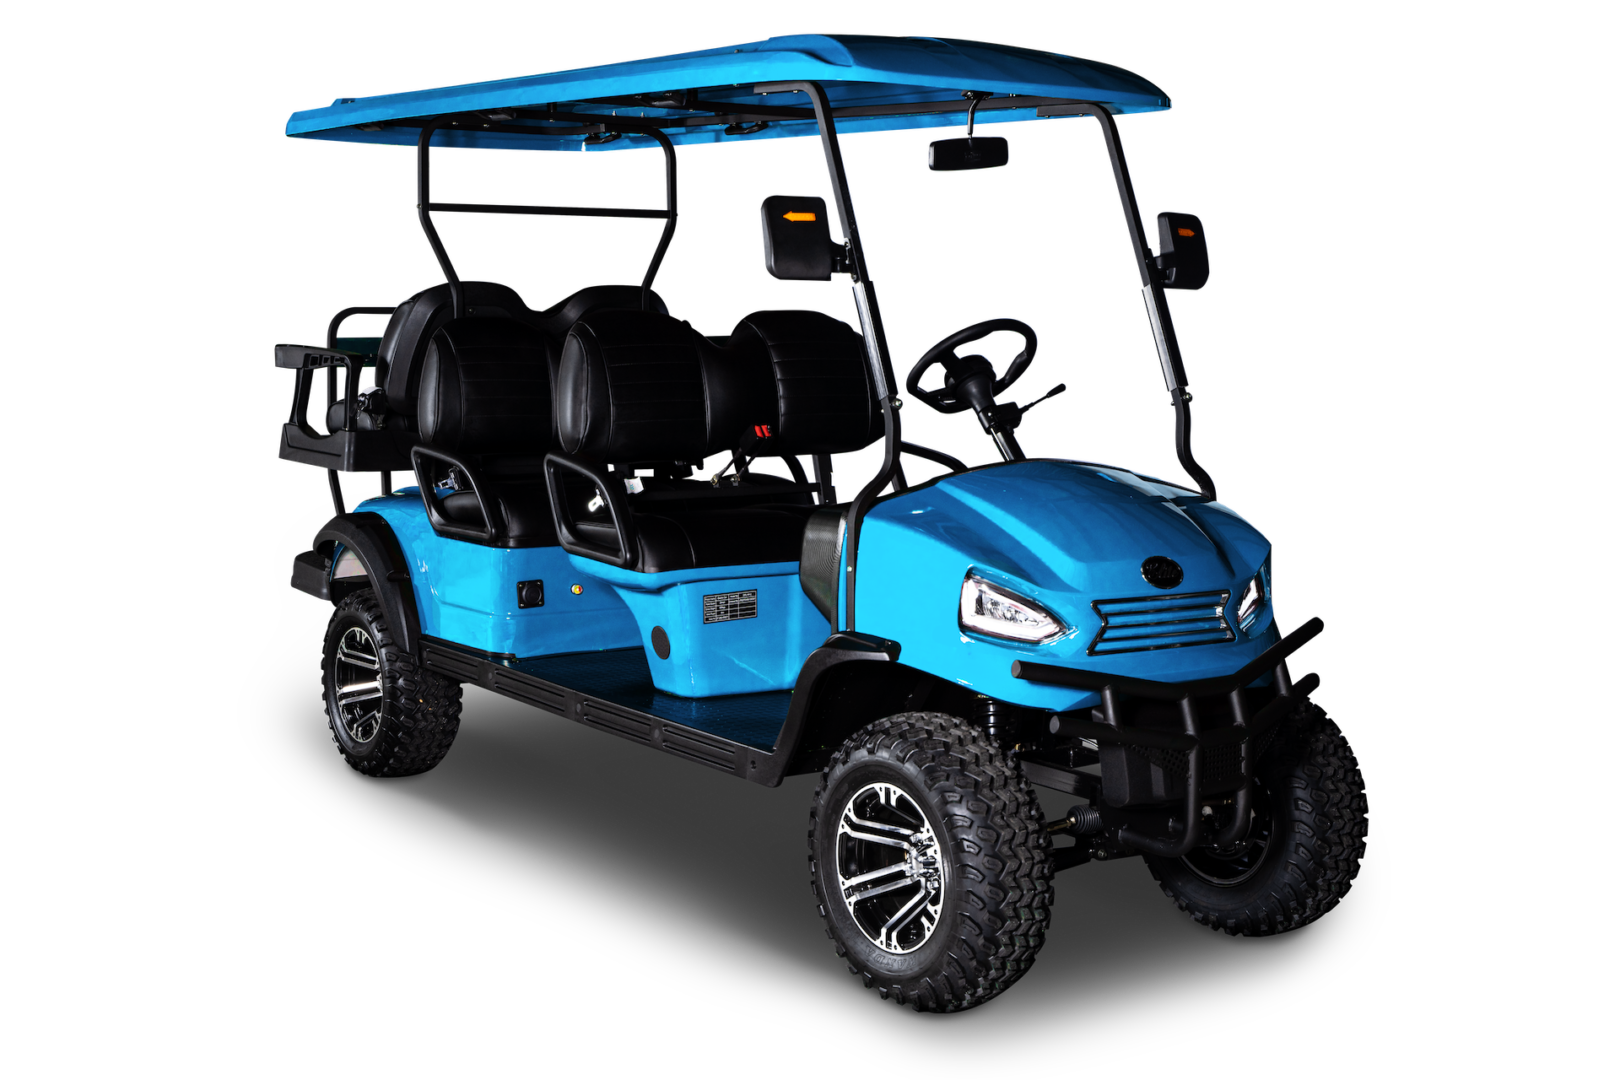 A blue golf cart with a canopy on top.